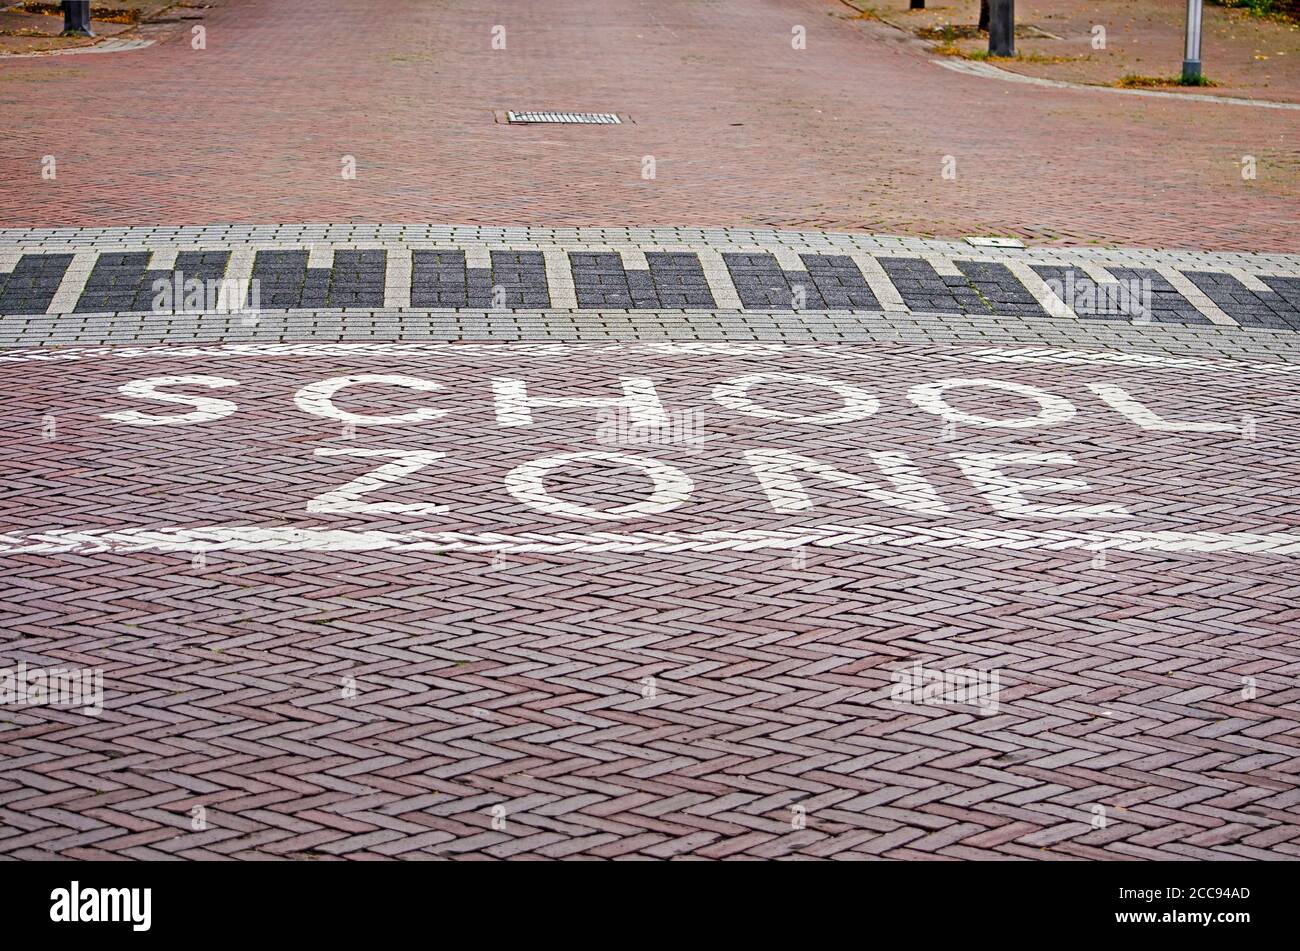 The words 'school zone' witten in white paint on a brick road in wolle, The Netherlands, to encourage drivers to reduce speed Stock Photo